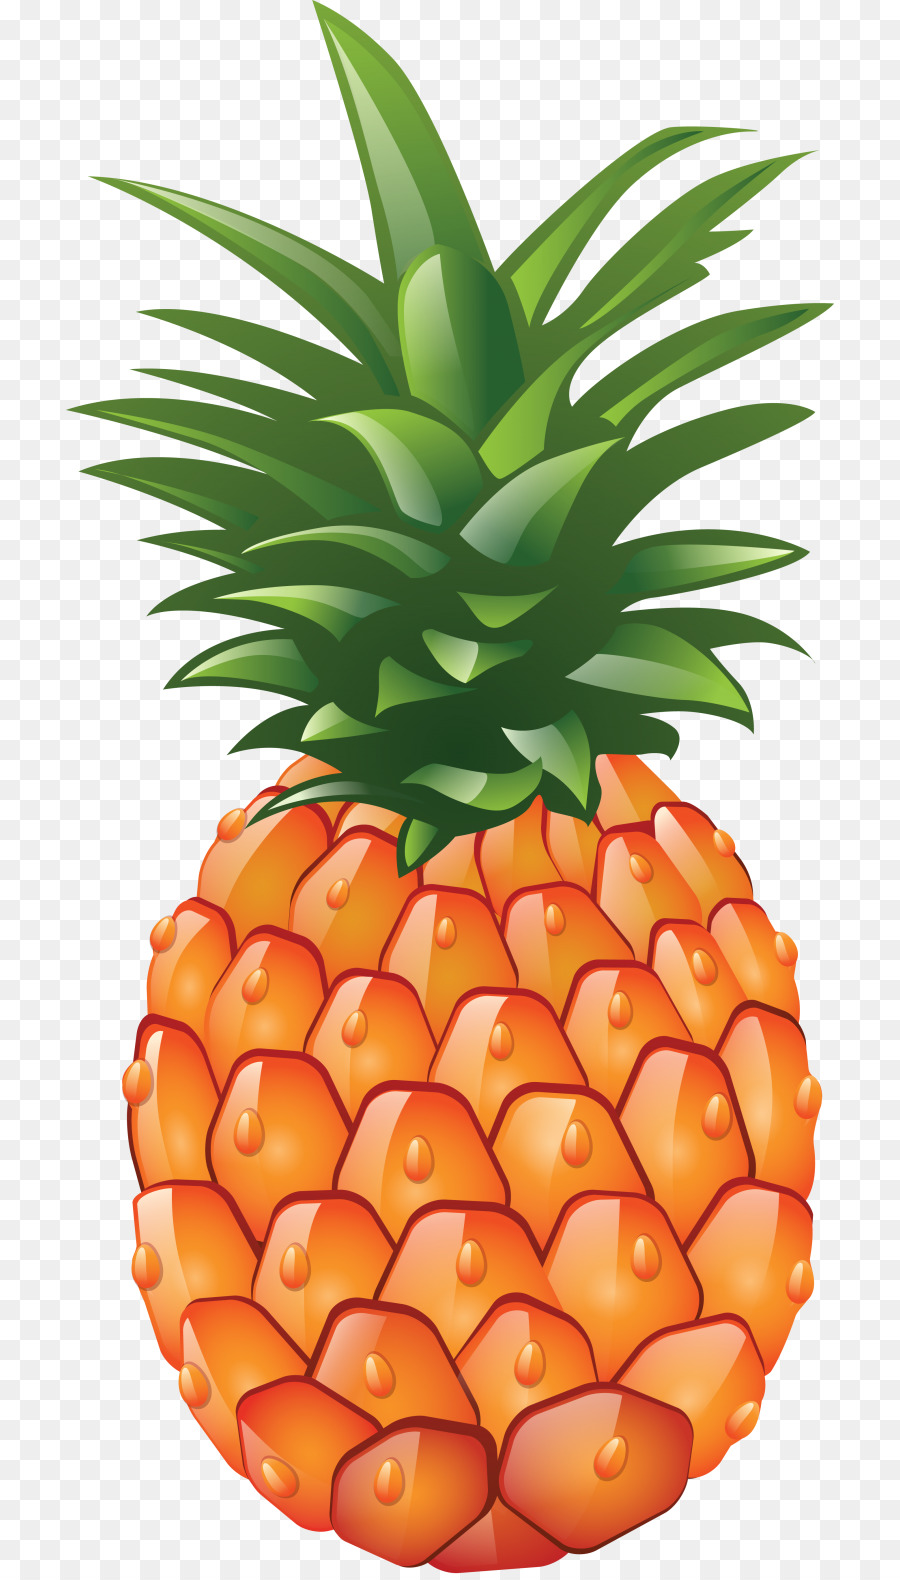 Pineapple Computer Icons Clip art - artwork png download - 768*1574 - Free Transparent Pineapple png Download.